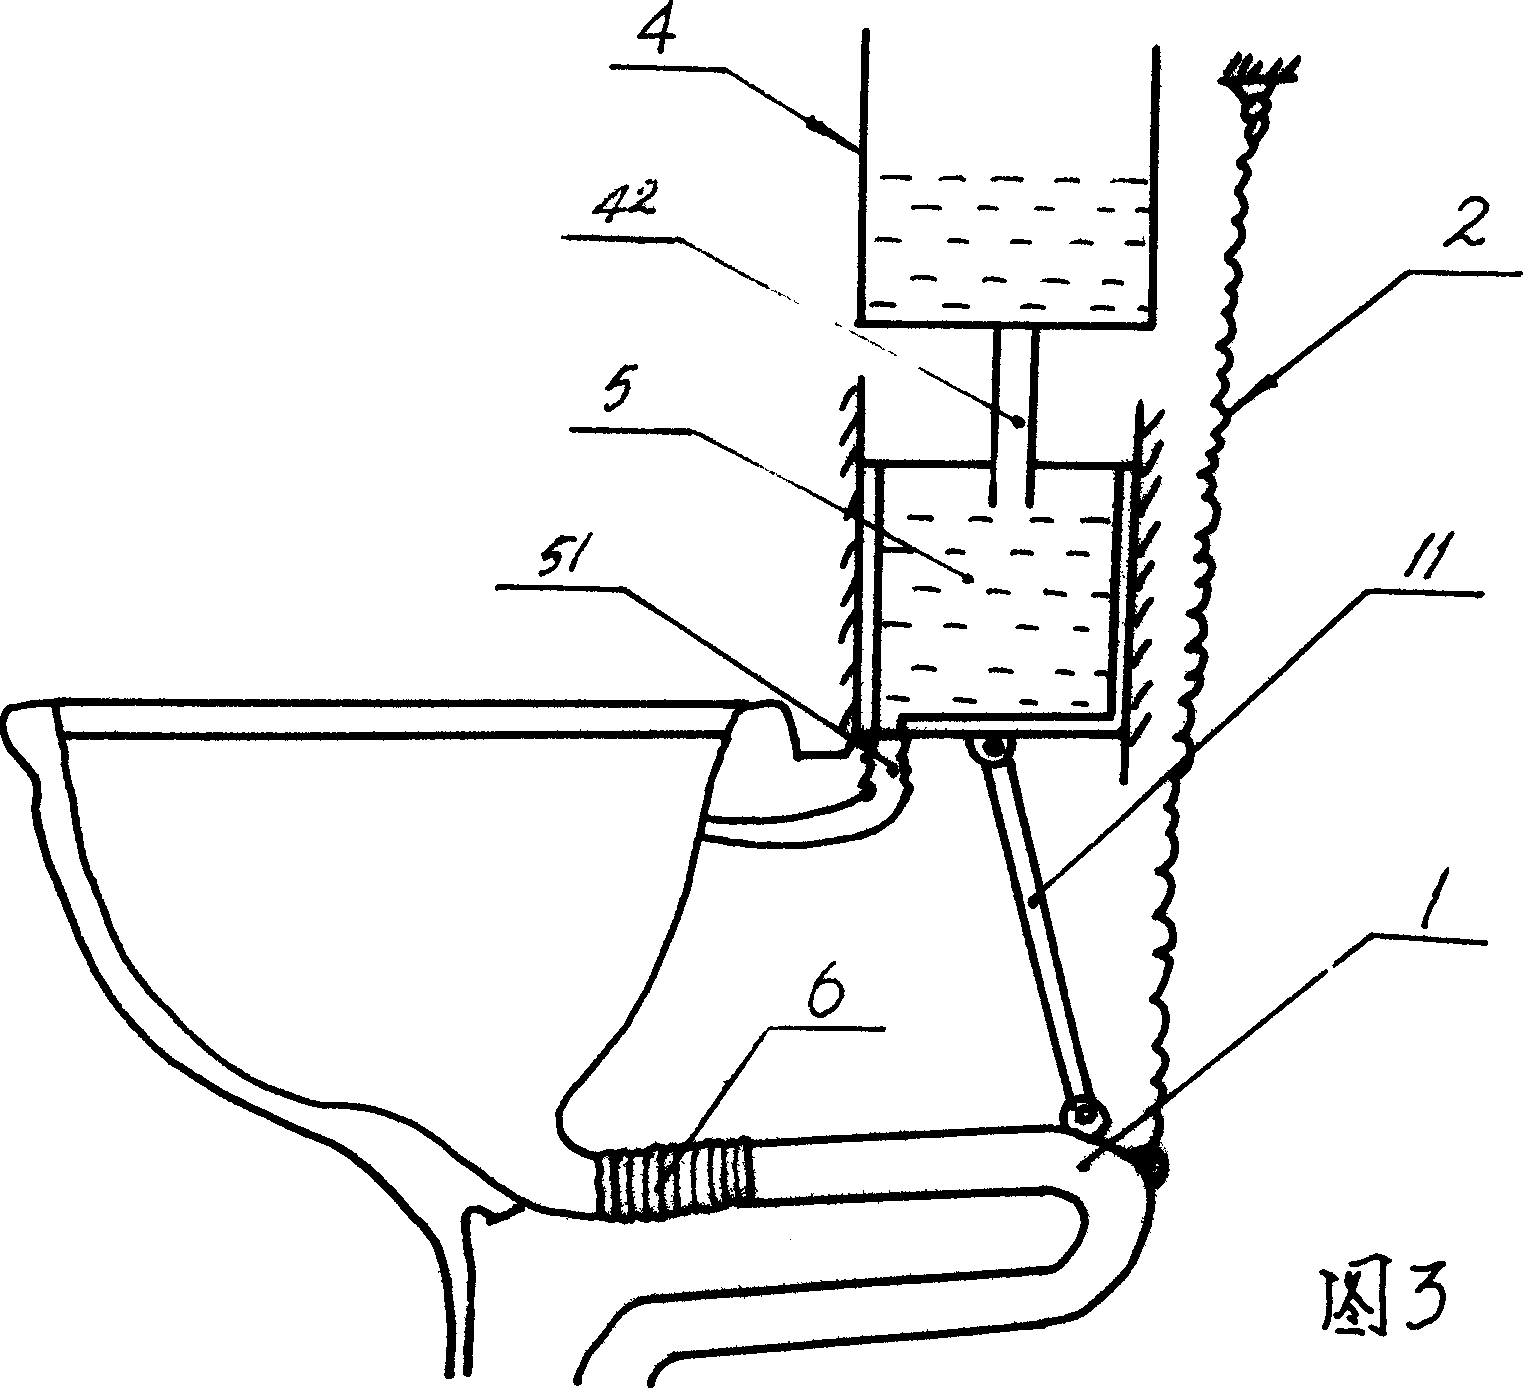 Control device for discharge pipe of water saving closet